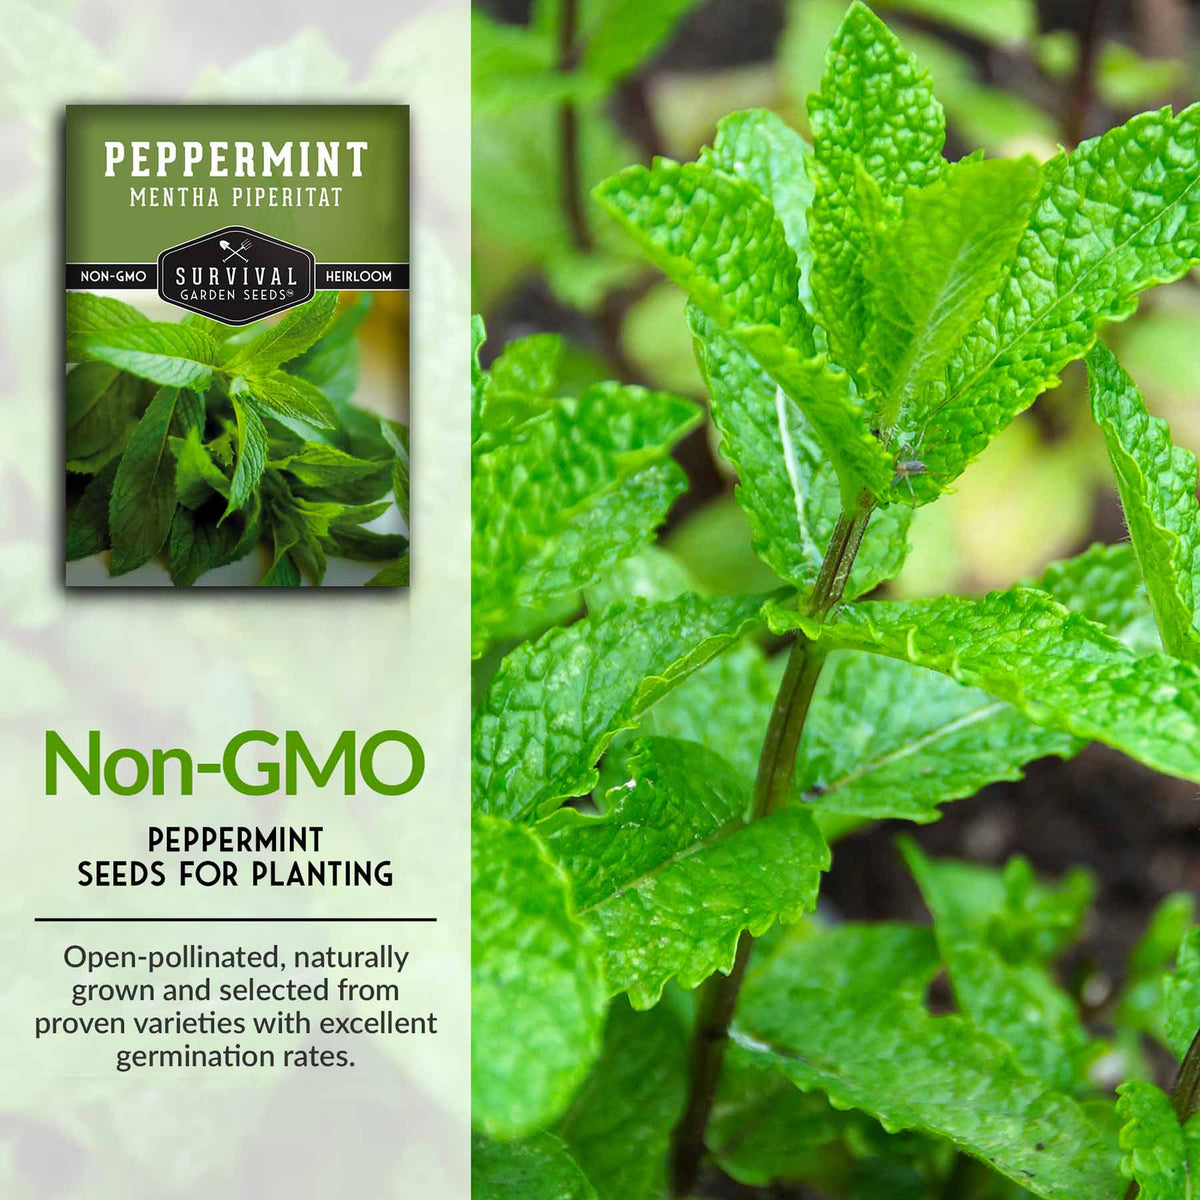 Non-GMO peppermint seeds for planting